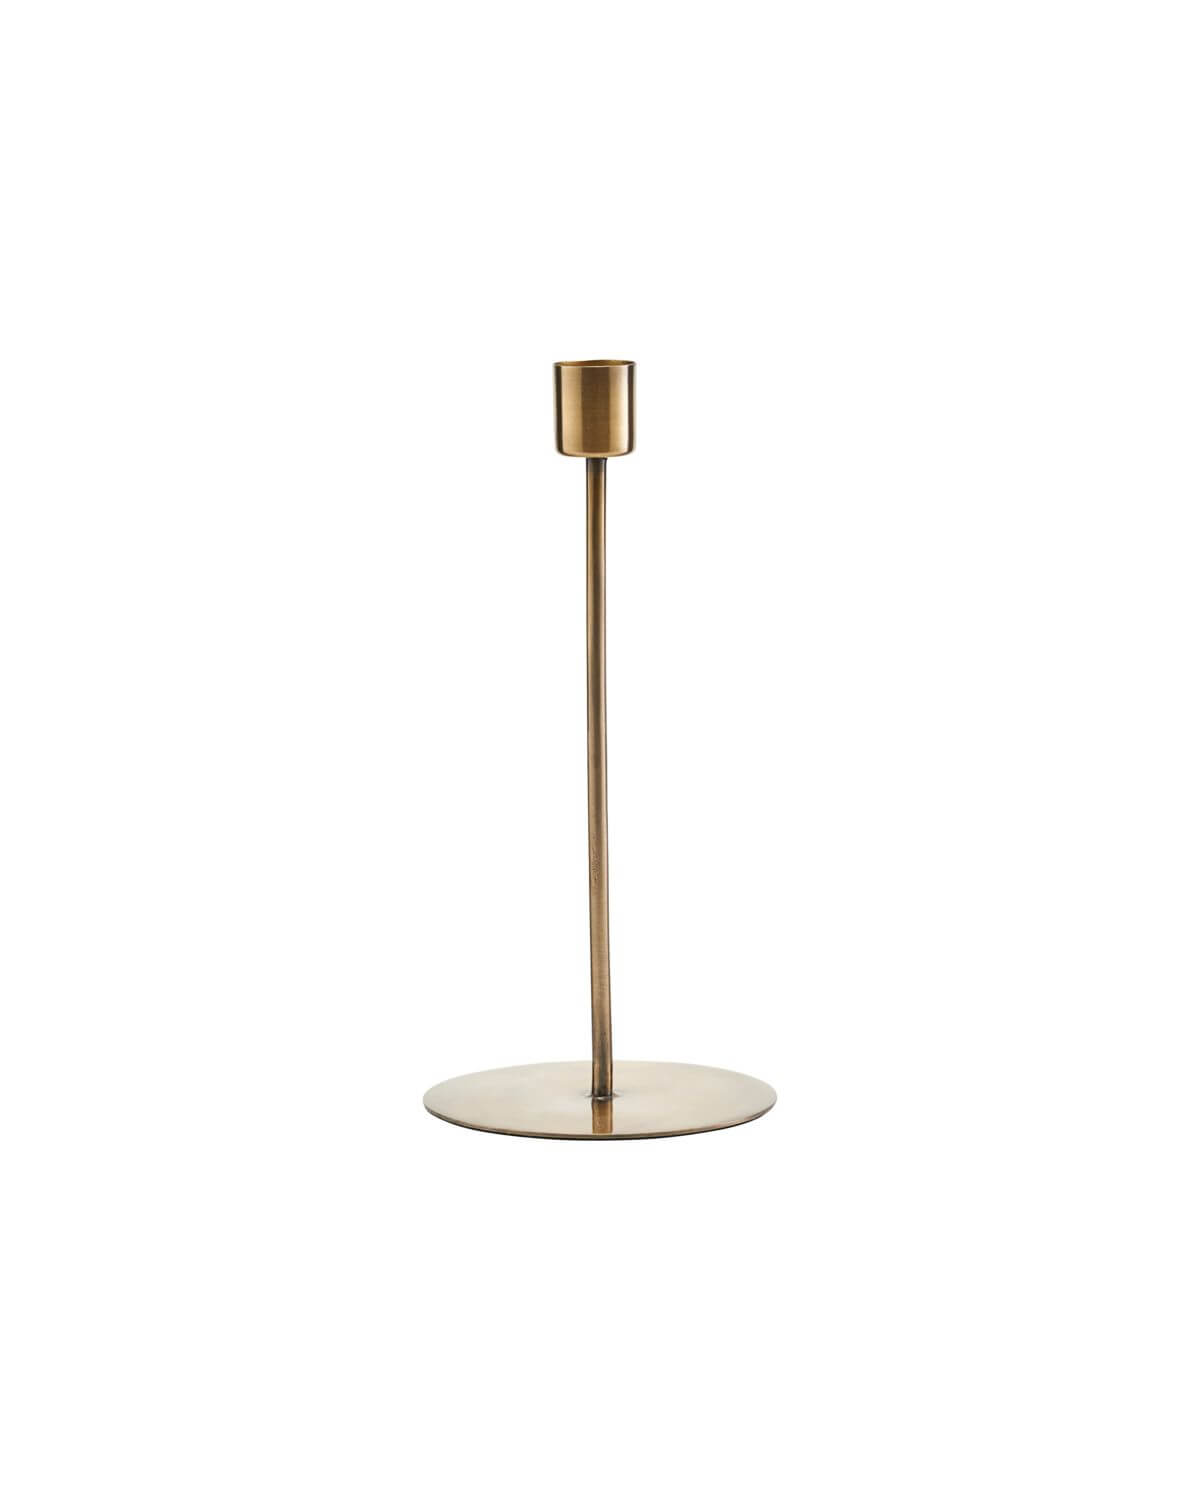 Candle Holder | Tall | Anit | Antique Brass | by House Doctor - Lifestory - House Doctor